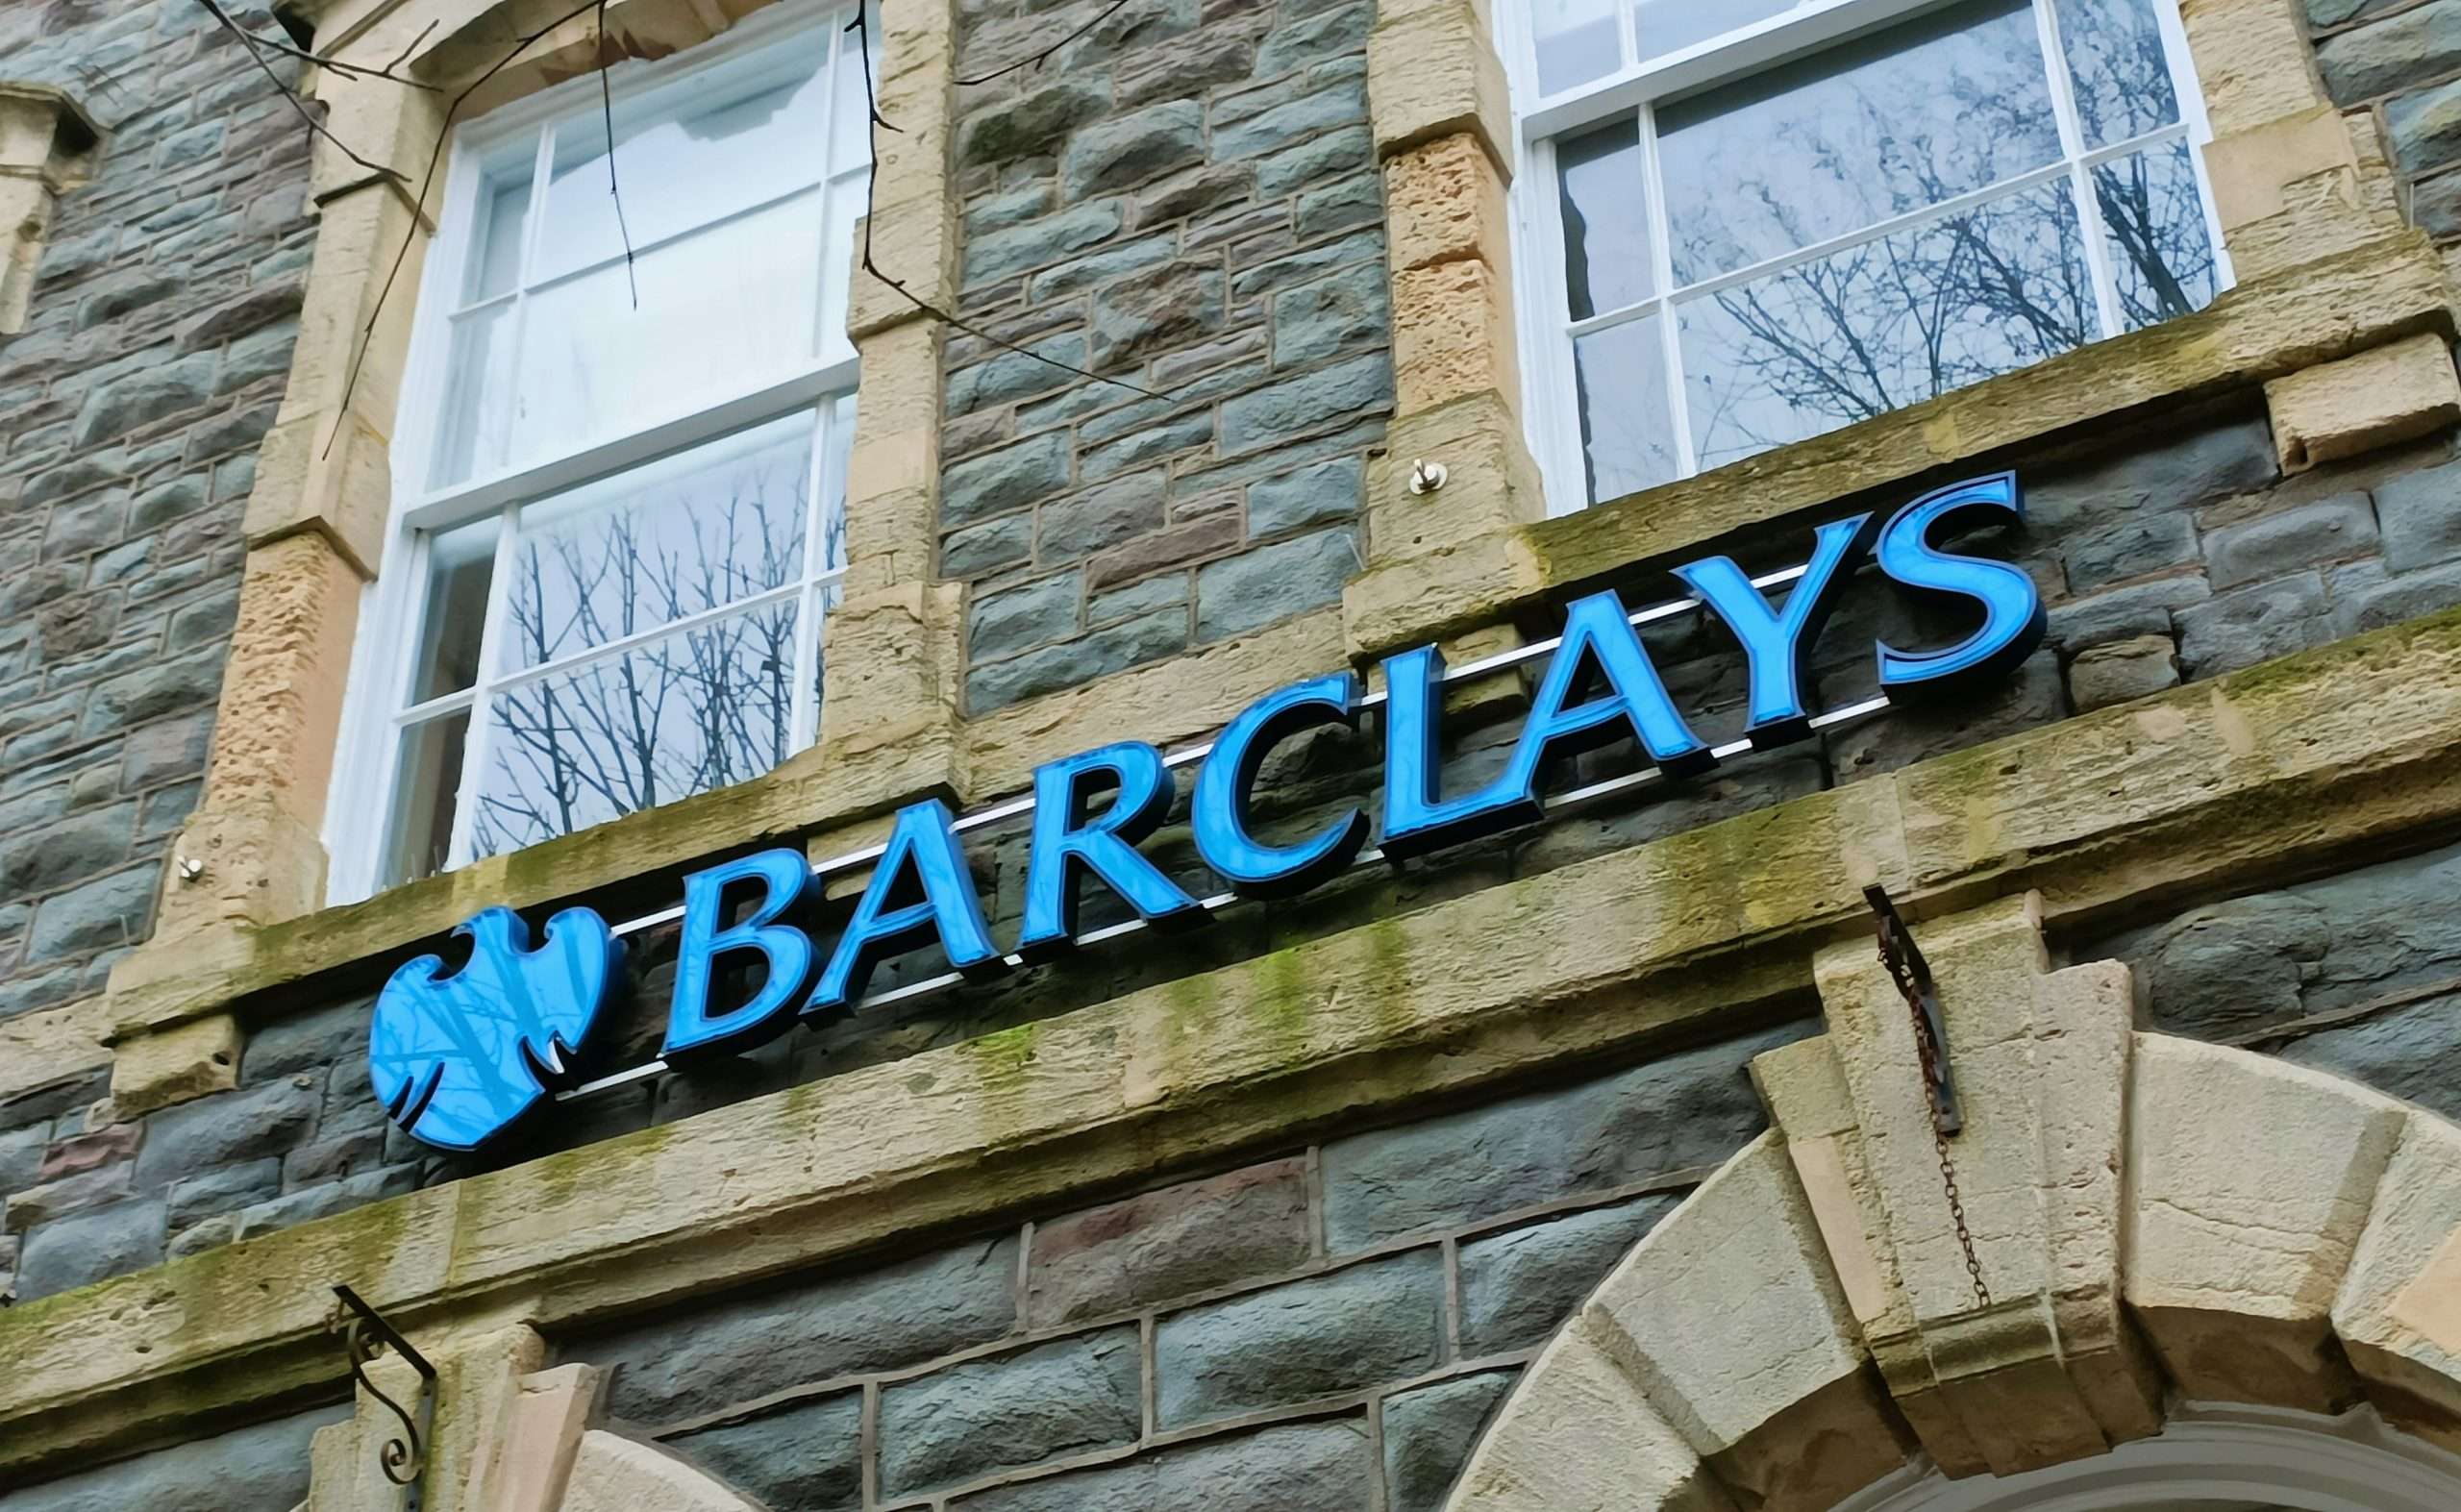 County Hall in Haverfordwest to offer community banking in wake of Barclays closure